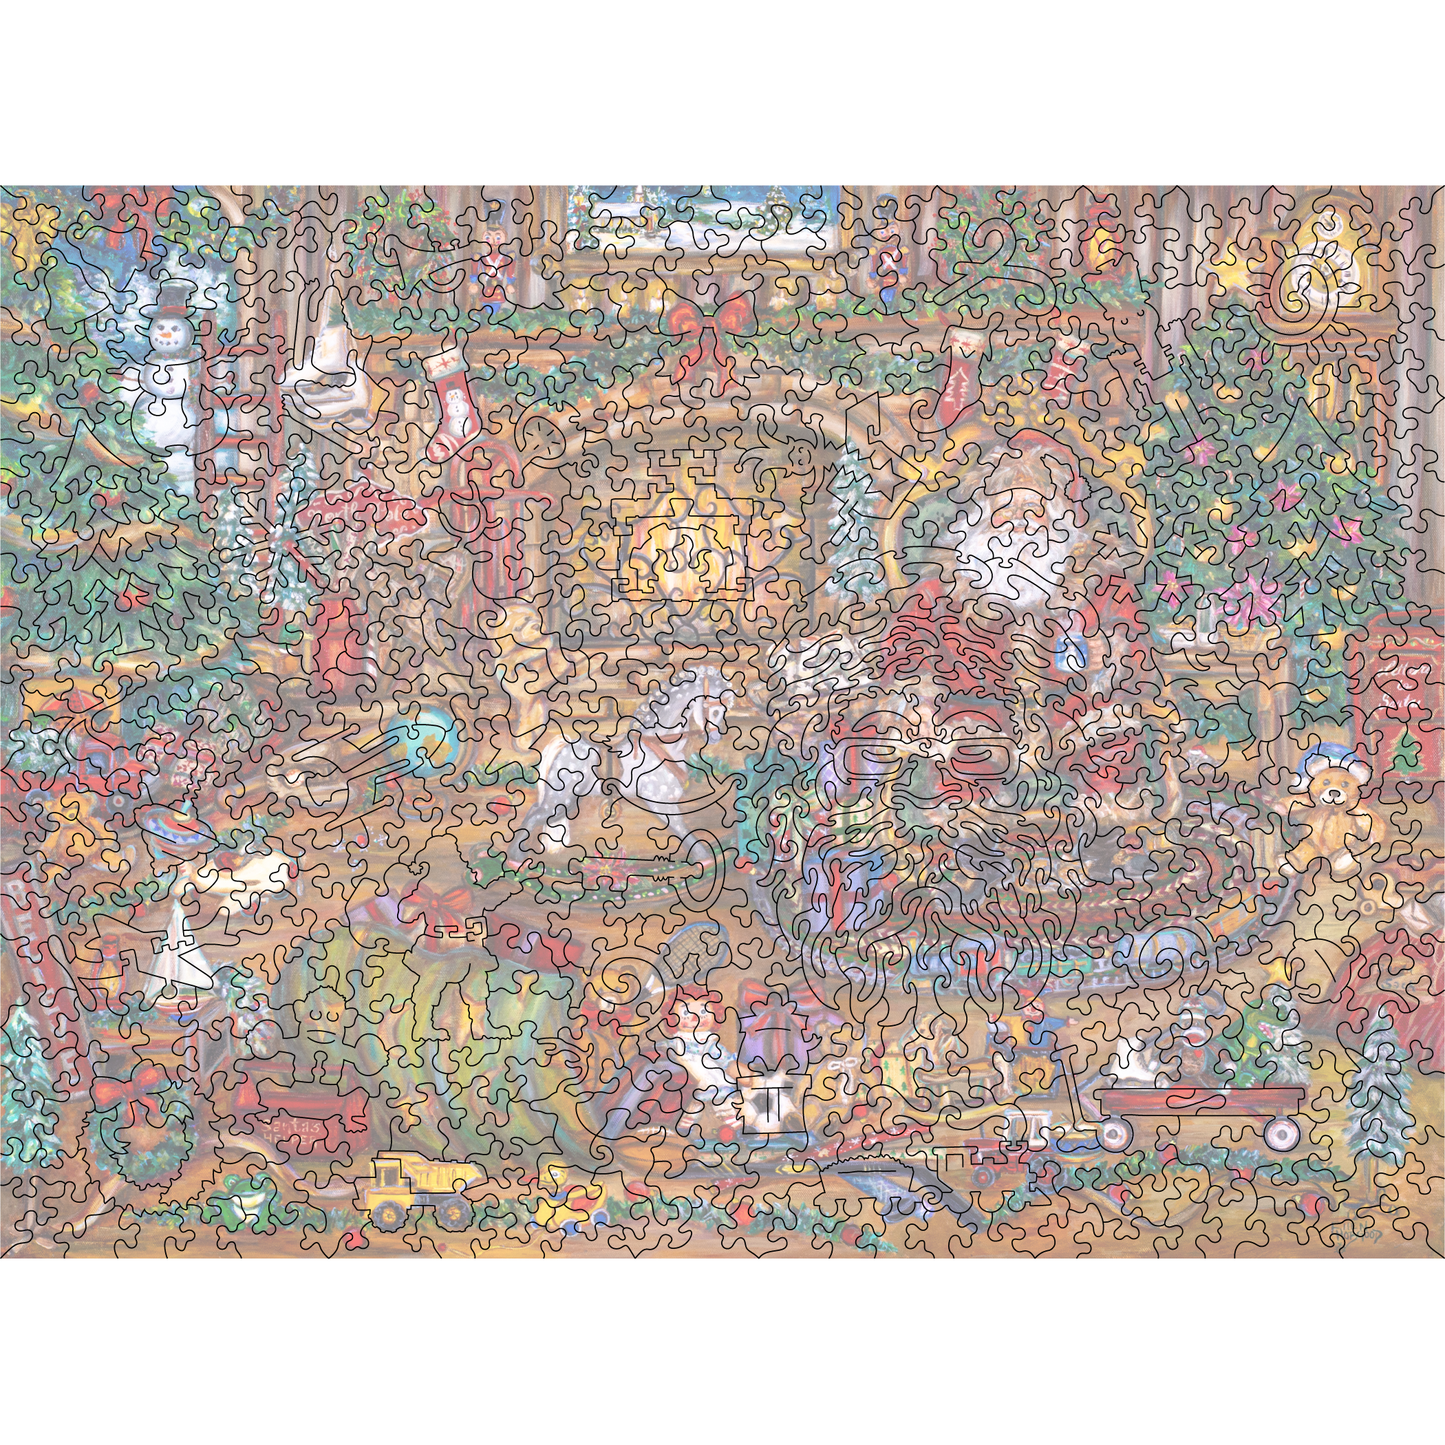 Old Fashioned Christmas (526 Pieces)